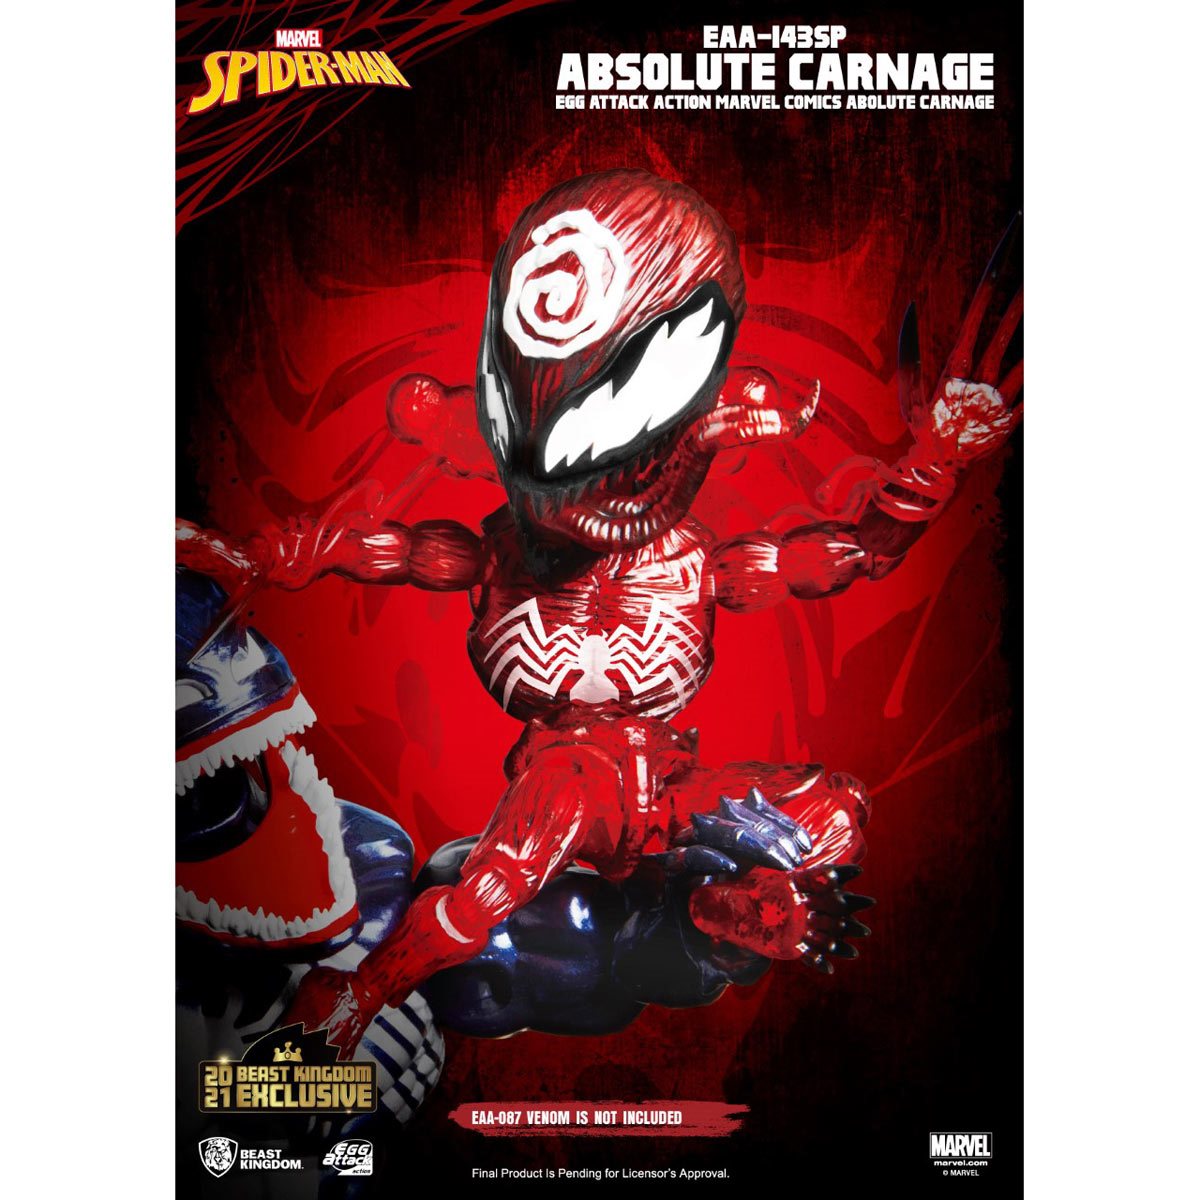 Marvel - Absolute Carnage EAA-143SP Beast Kingdom Summer Exclusive Action Figure